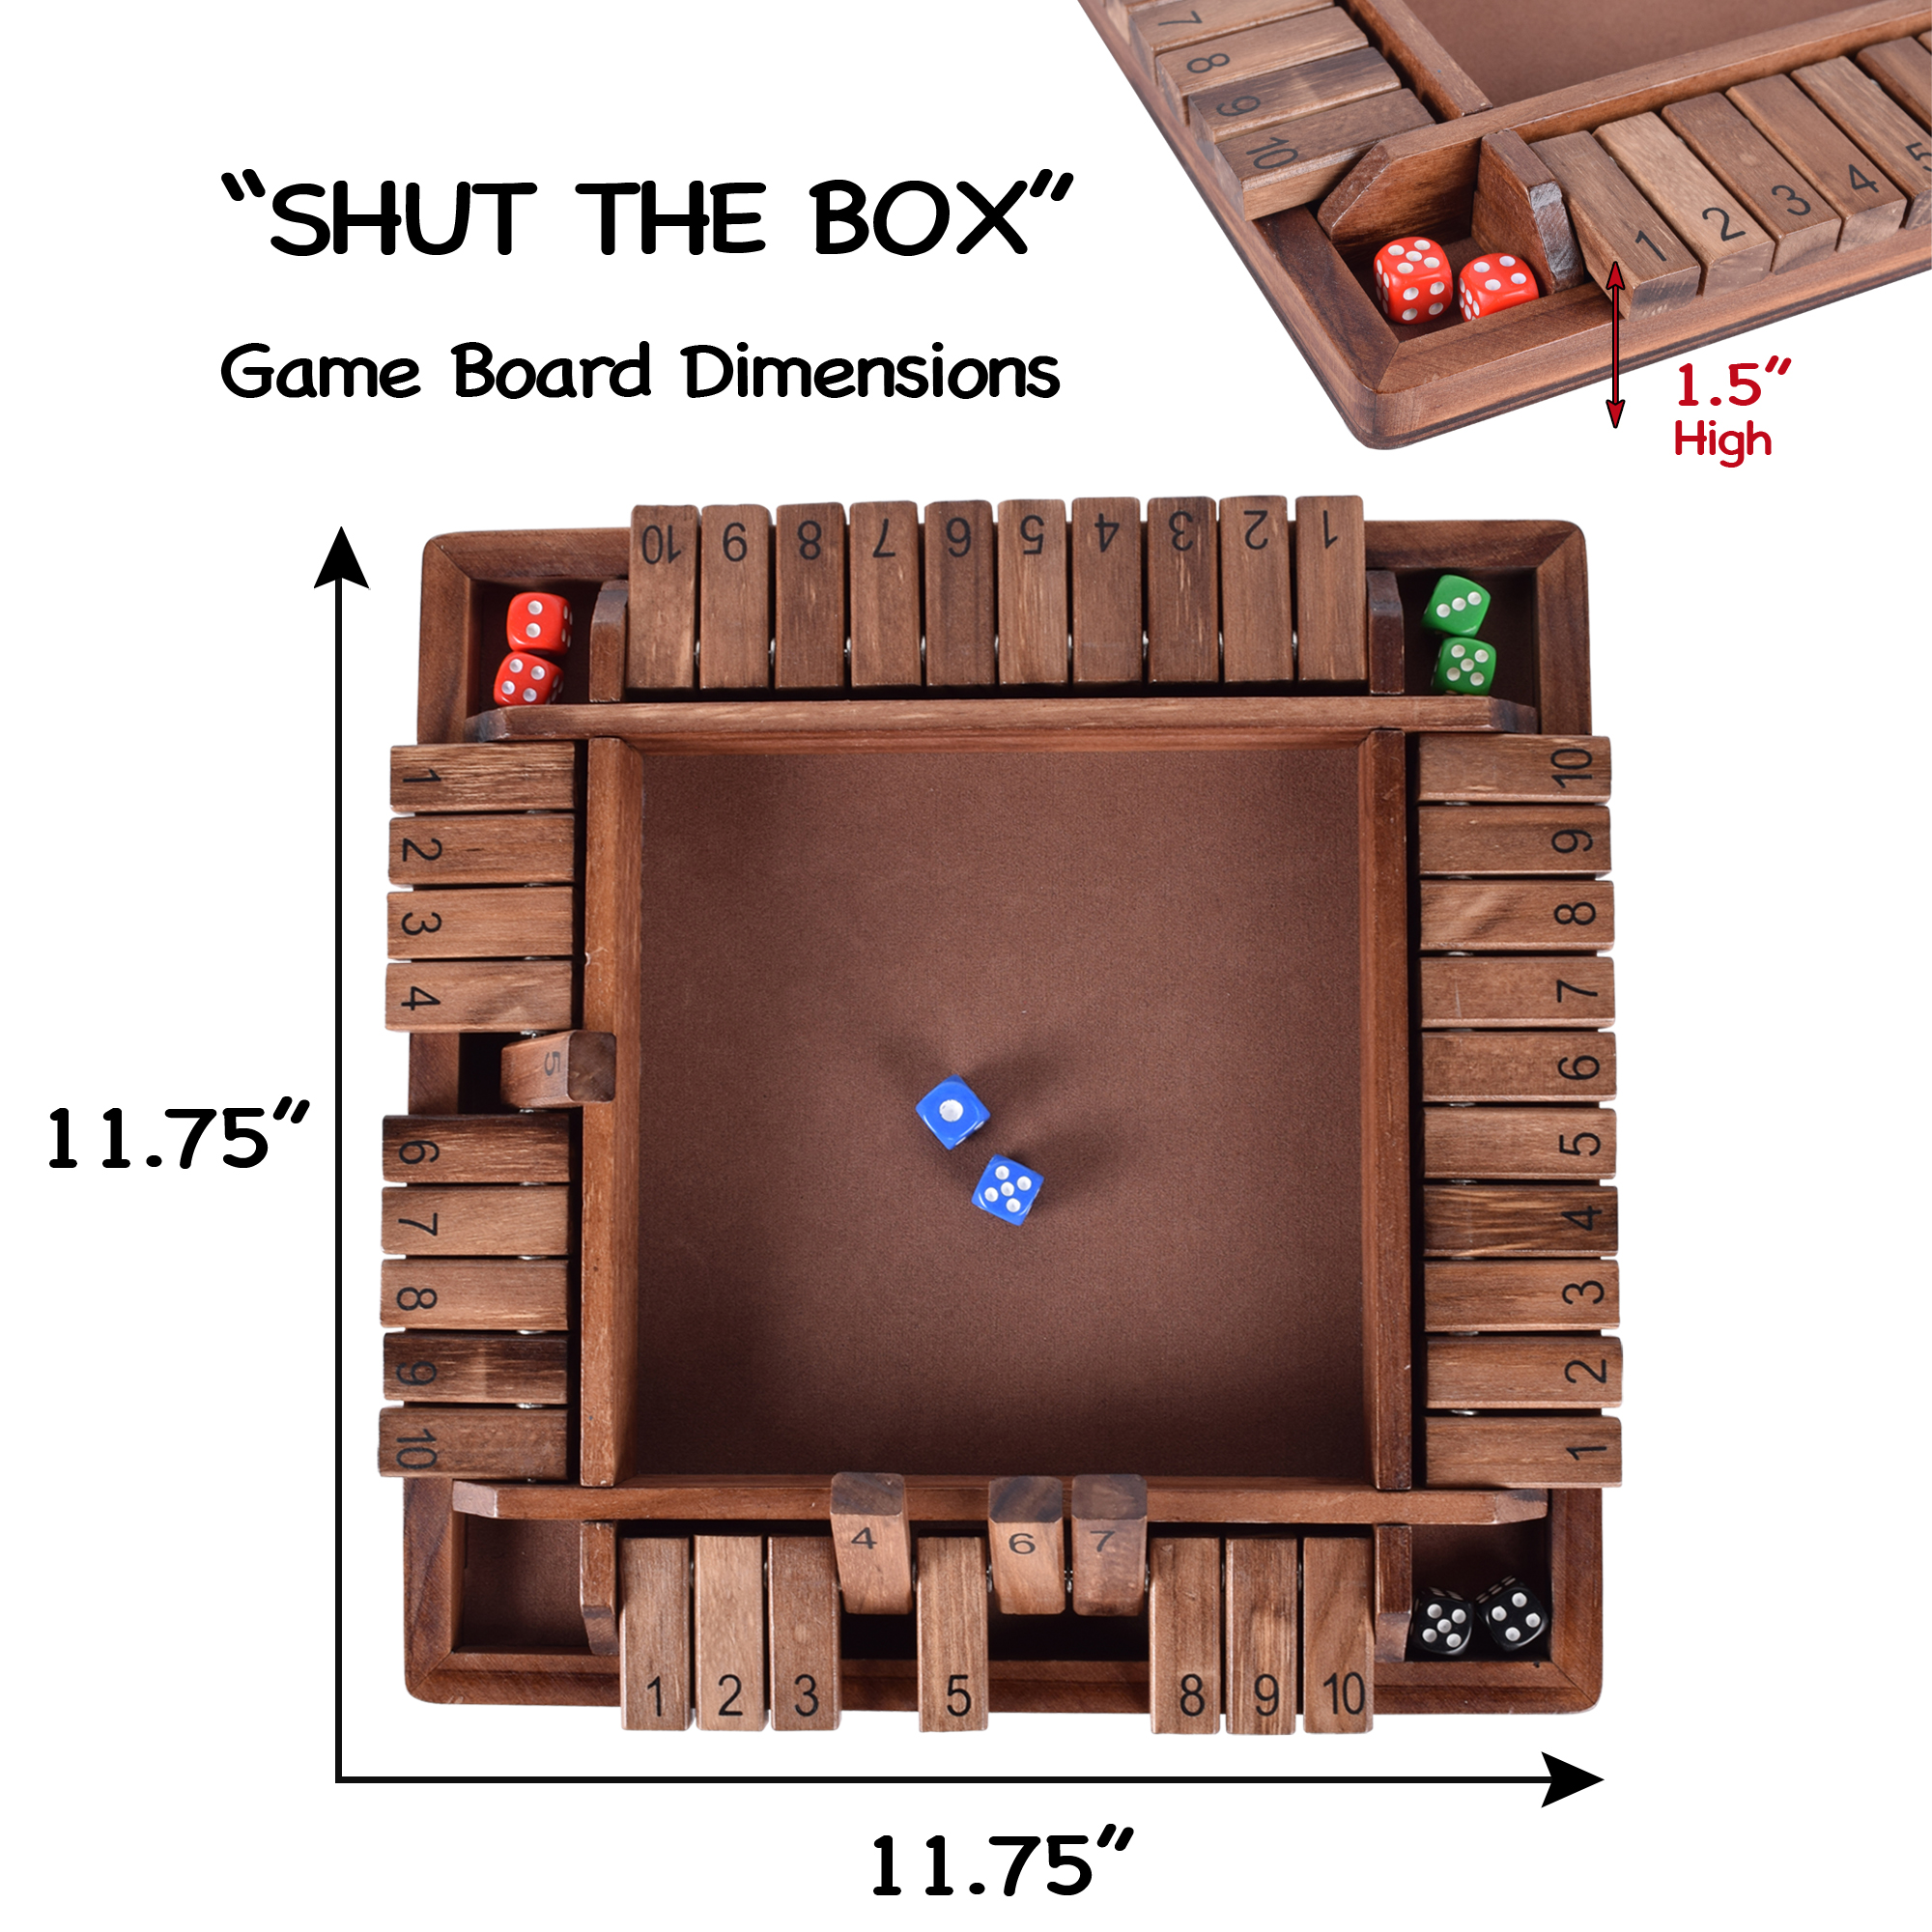 Educational Math Learning-Shut The Box Game for 2-4 players